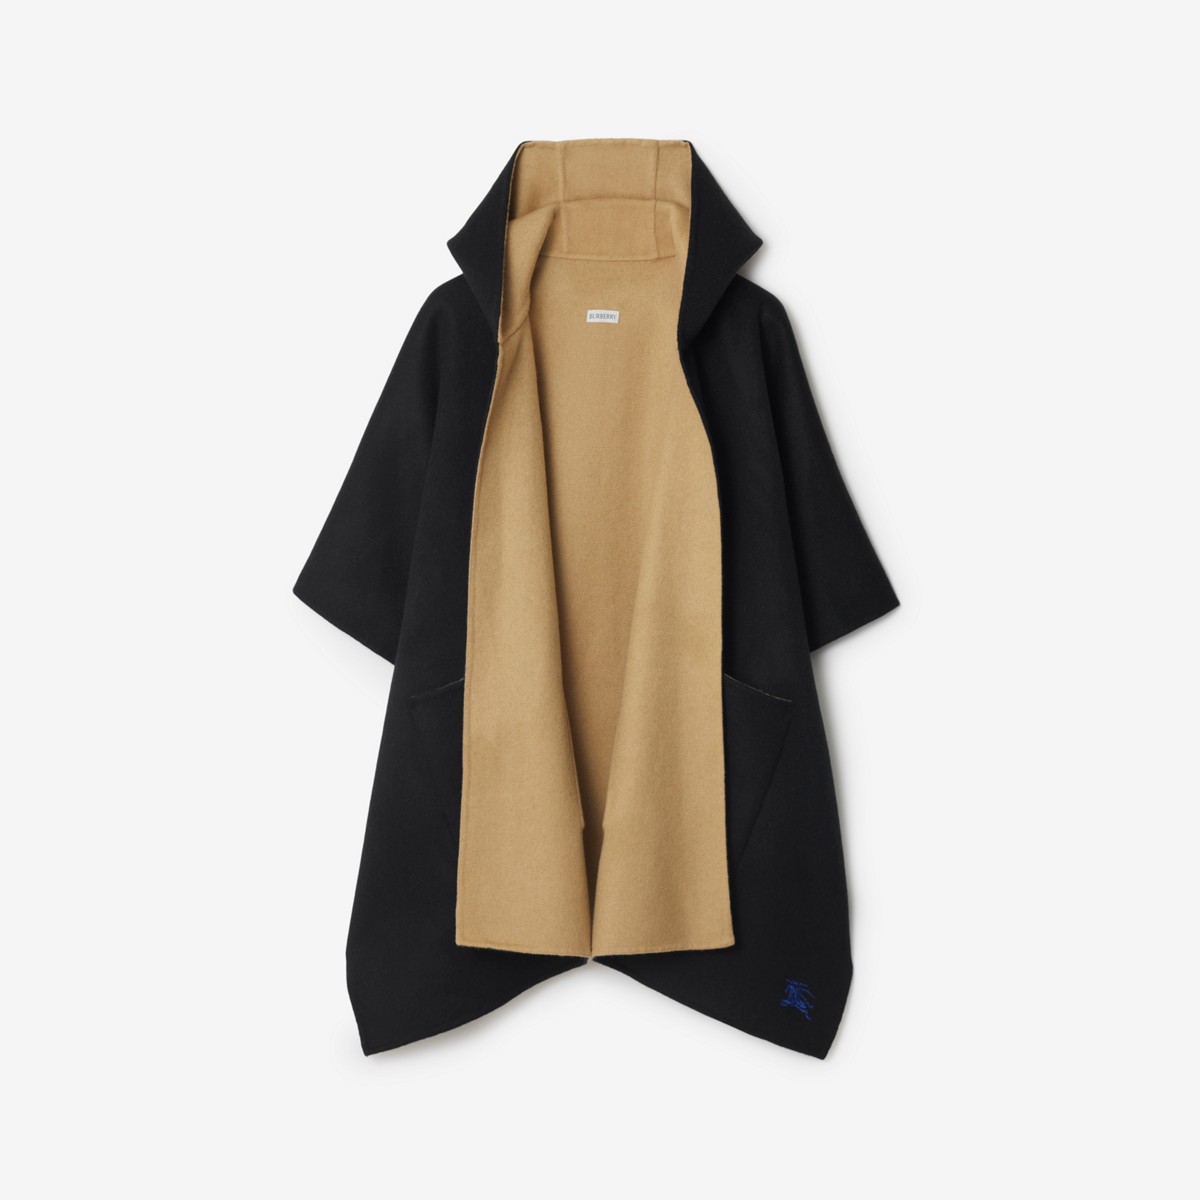 Burberry Ekd Cashmere Hooded Cape In Black/archive Beige